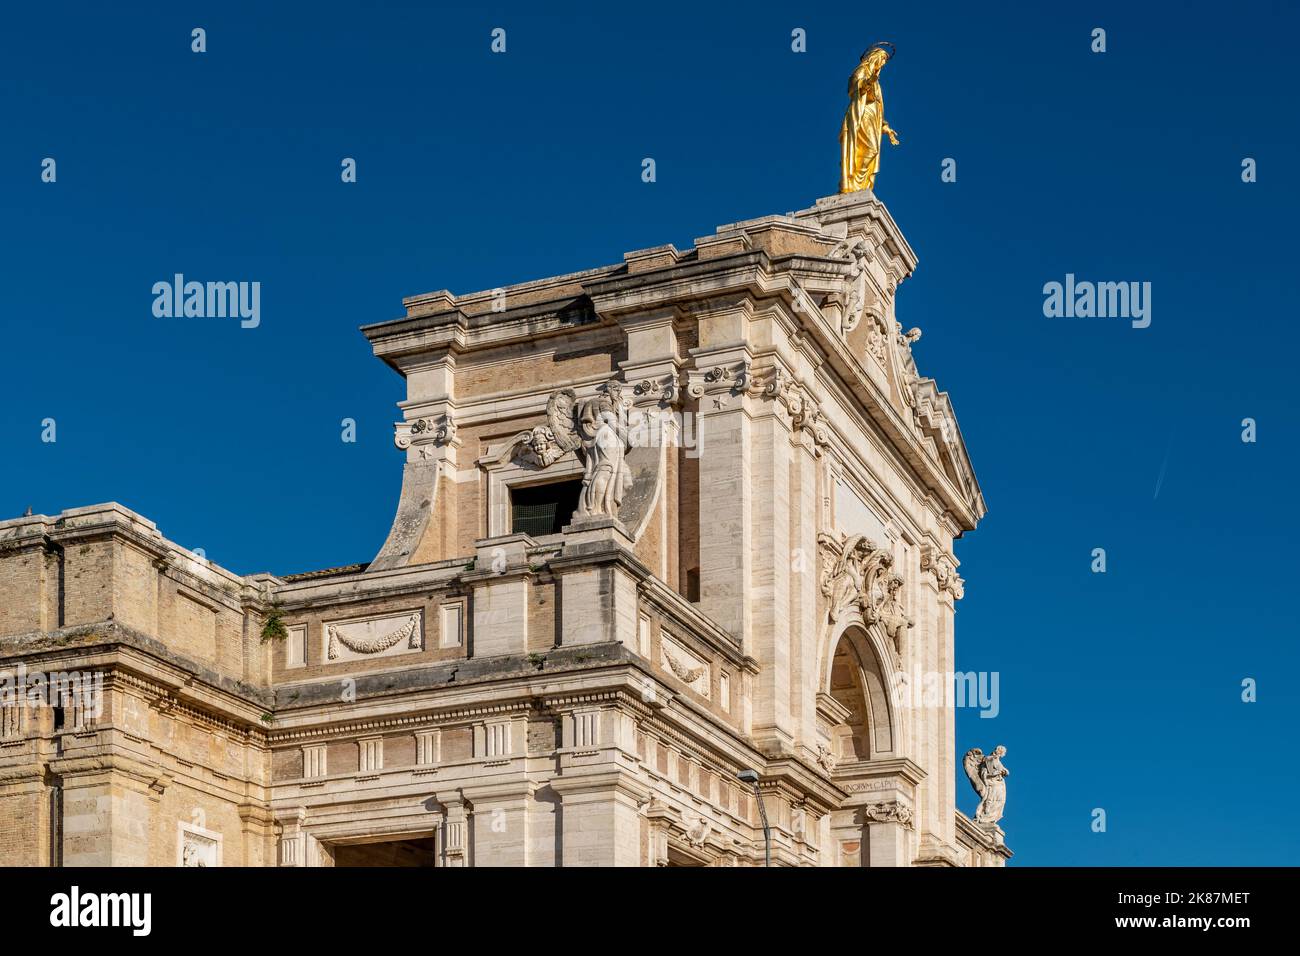 A detail of the basilica of Santa Maria degli Angeli in the homonymous locality, Assisi, Italy Stock Photo